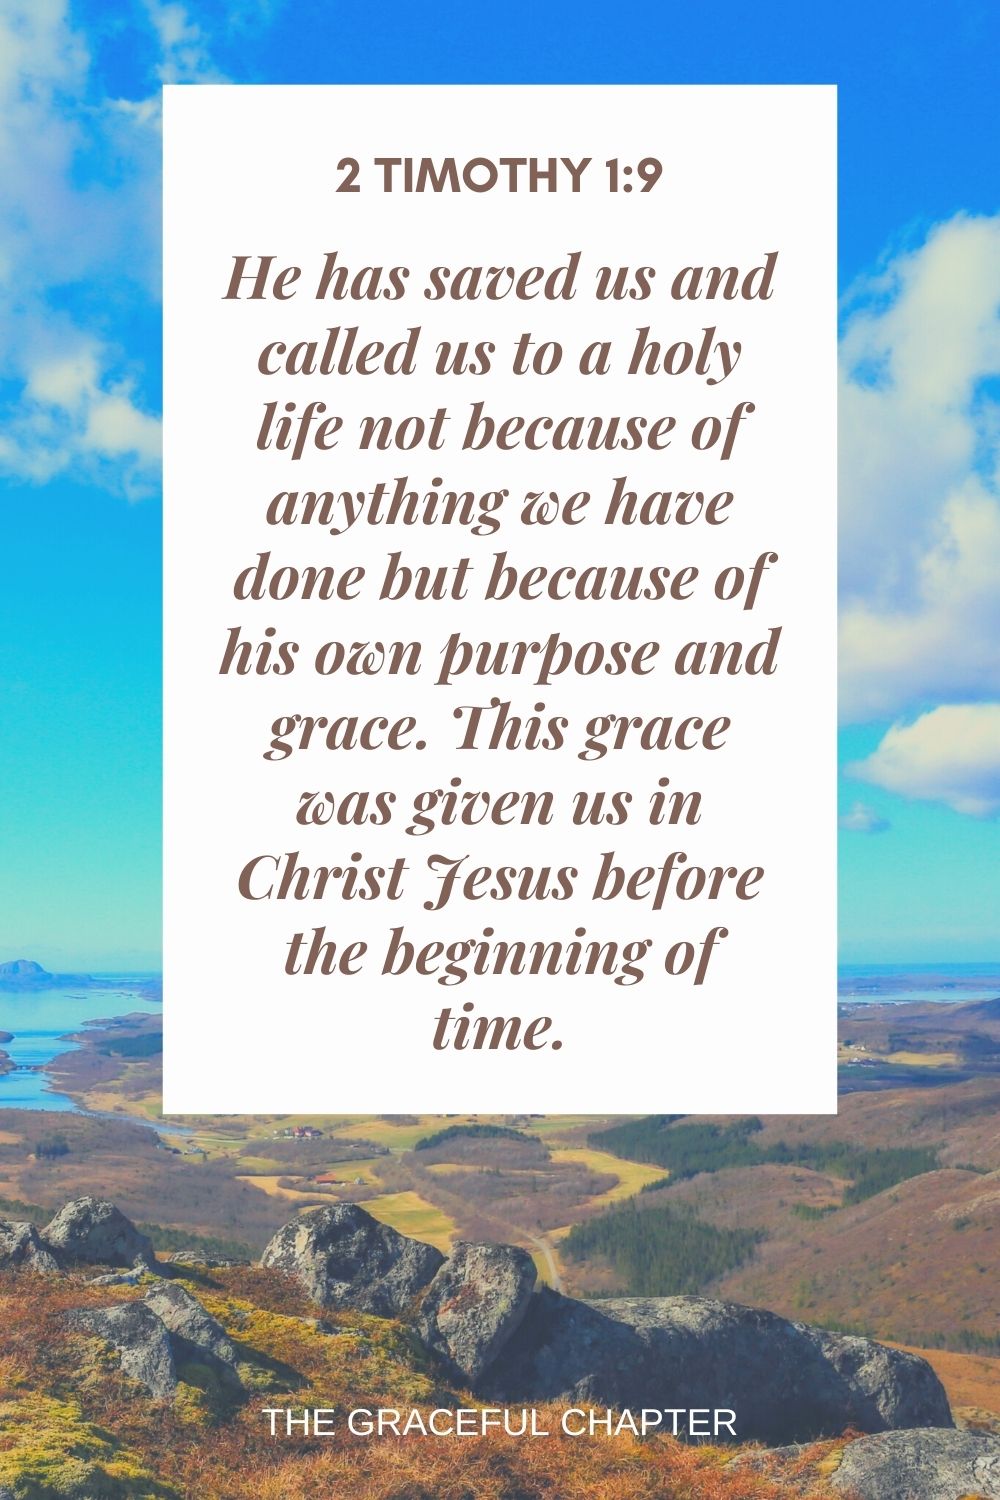 He has saved us and called us to a holy life not because of anything we have done but because of his own purpose and grace. This grace was given us in Christ Jesus before the beginning of time. 2 Timothy 1:9